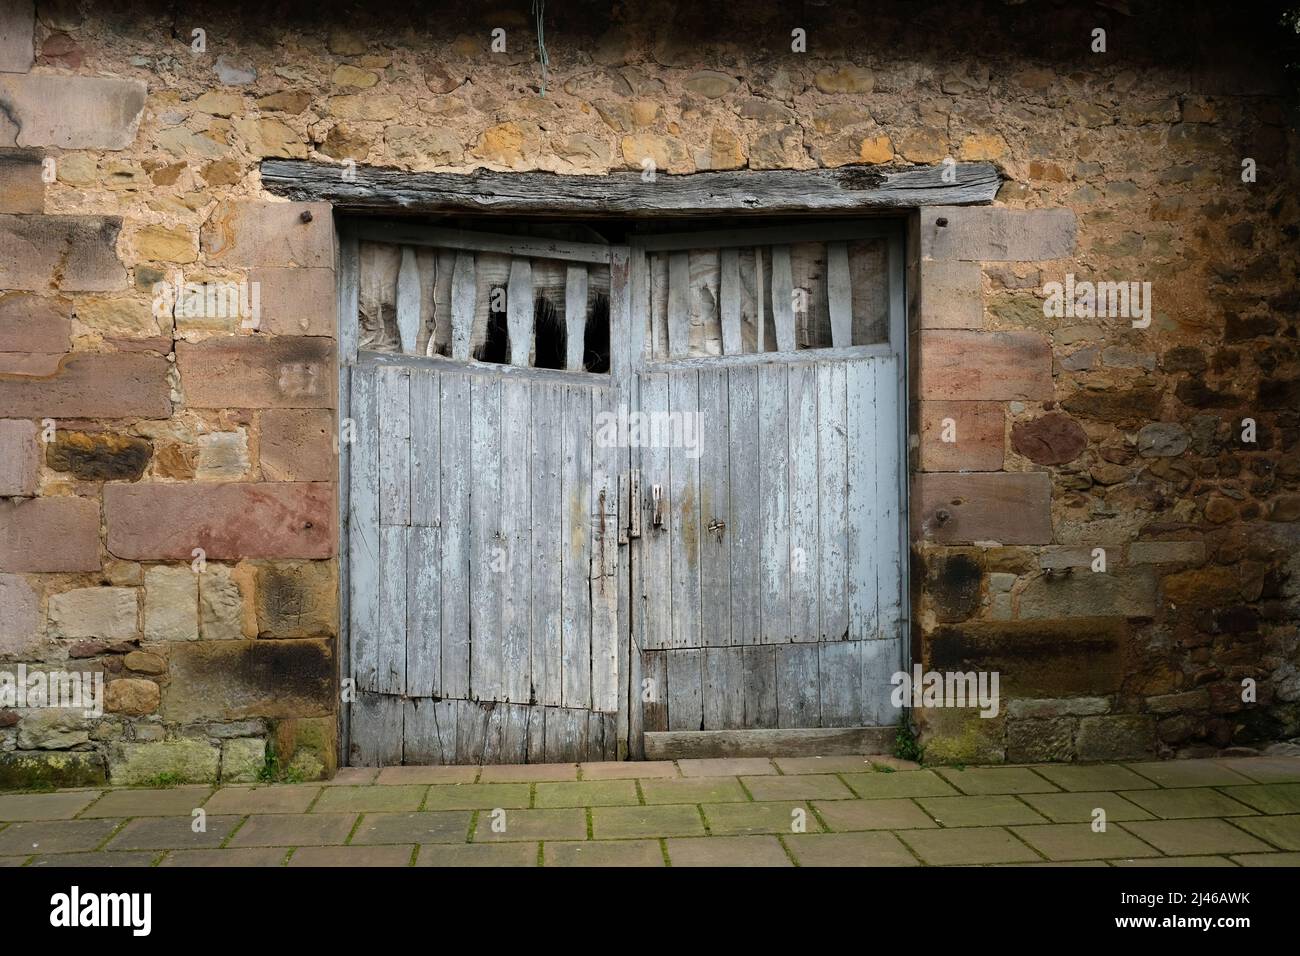 Wooden stable door in stone wall, Cartes, Cantabria, Spain Stock Photo